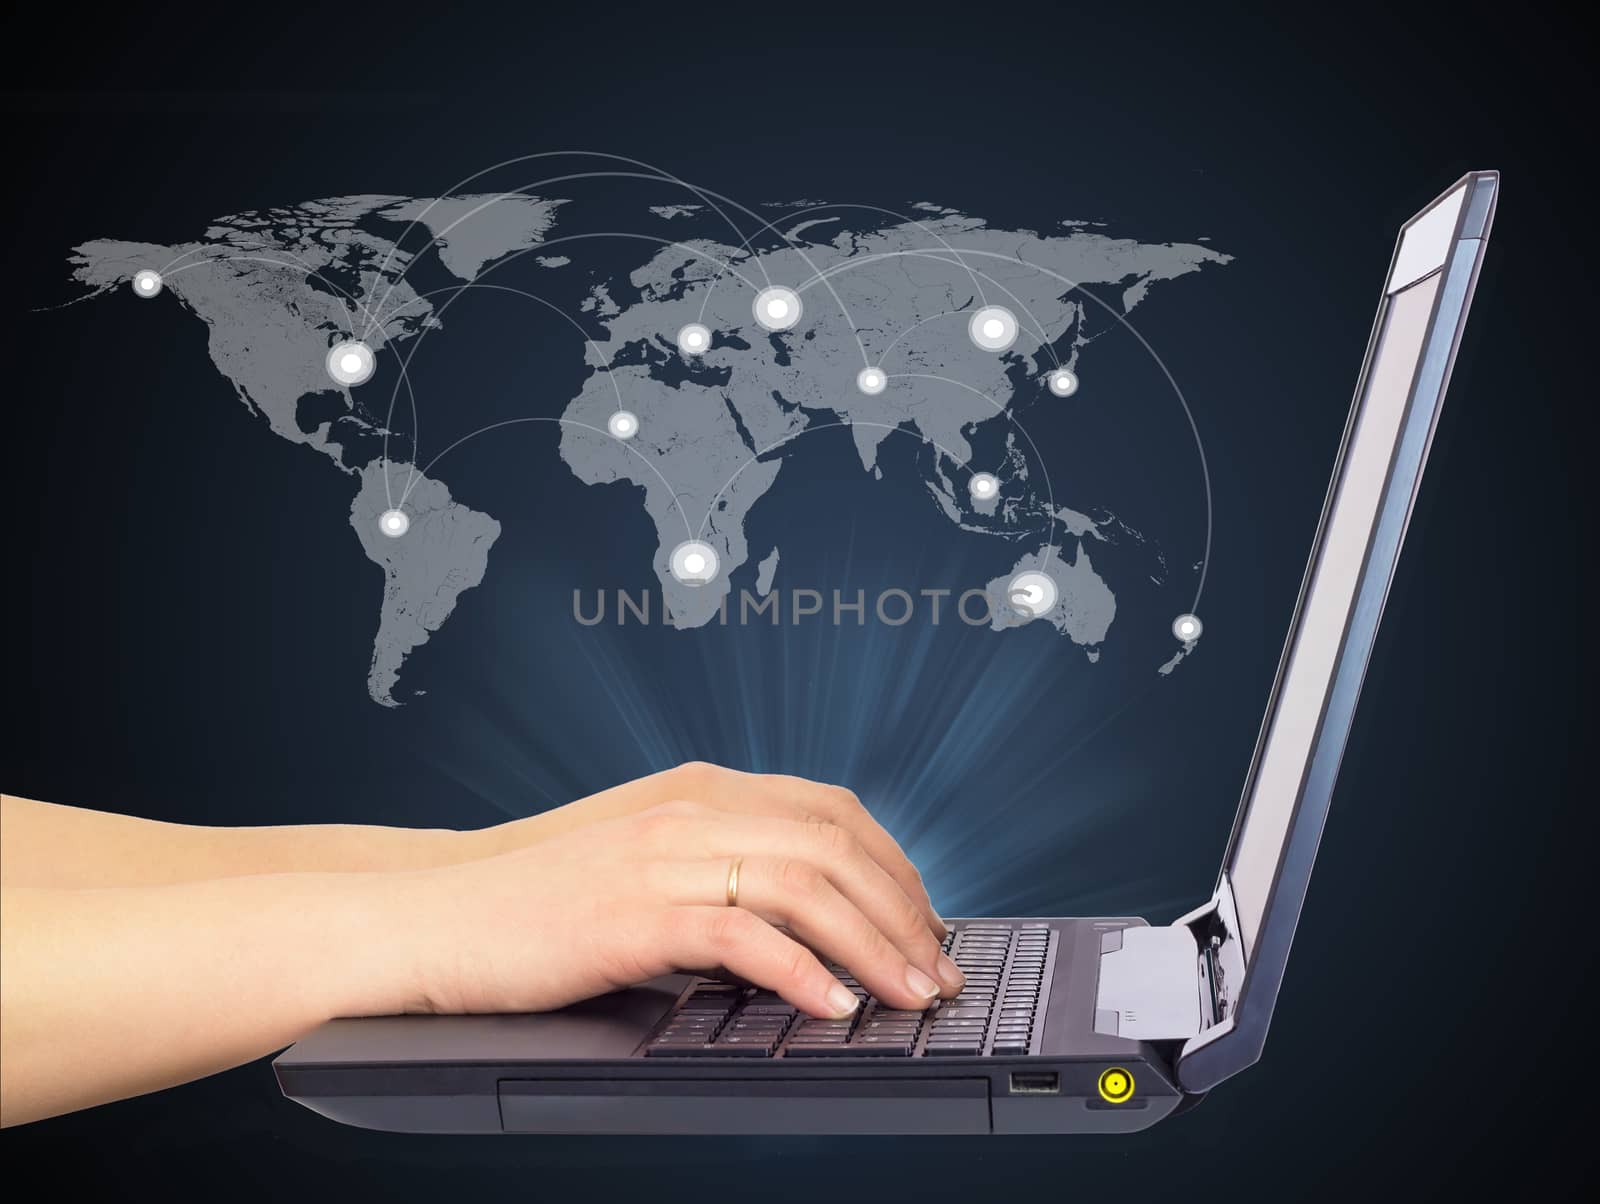 Female hands using laptop, side view. World map above, with connection points and lines. On dark background